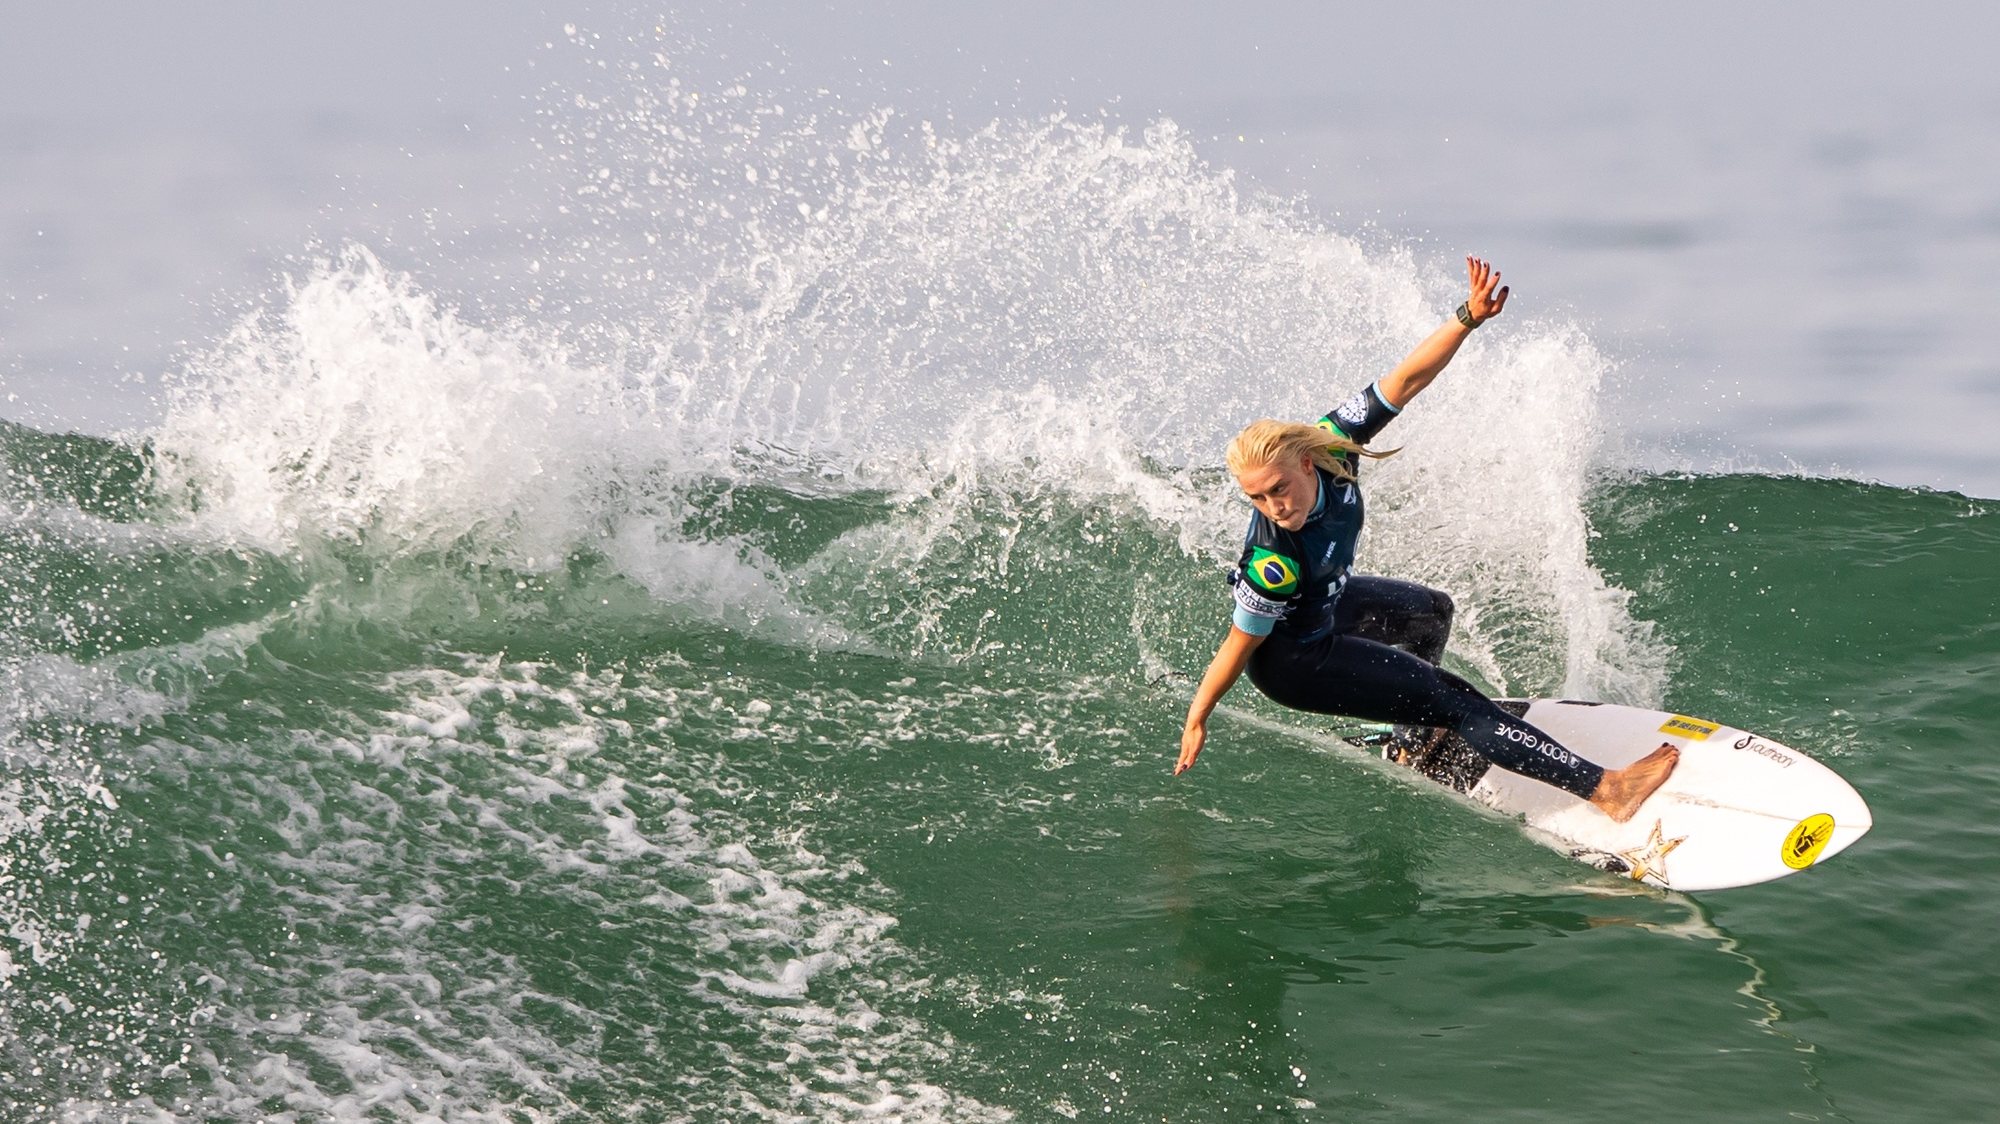 Brazilian surfer Tatiana Weston-Webb in action during the final heat of the  Meo Pro Portugal, as part of the World Surf League World Tour, at Supertubos beach, in Peniche, Portugal, 07 March 2022. JOSE SENA GOULAO/LUSA